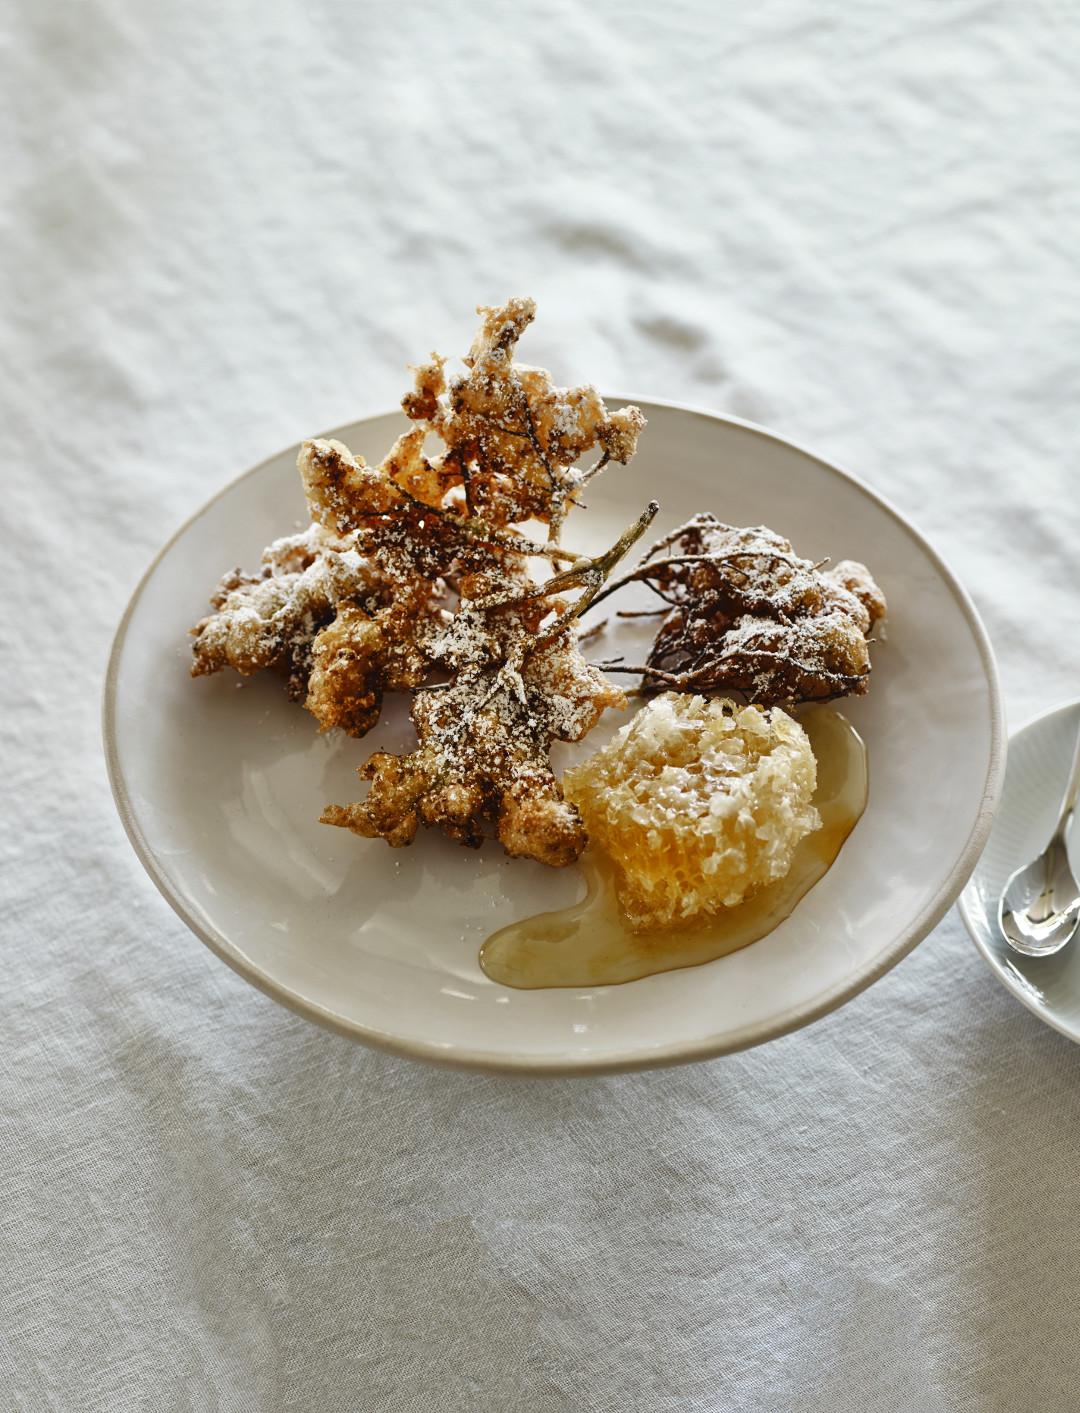 Elderflower fritters with honeycomb and salt, by Skye Gyngell, as featured in The Garden Chef